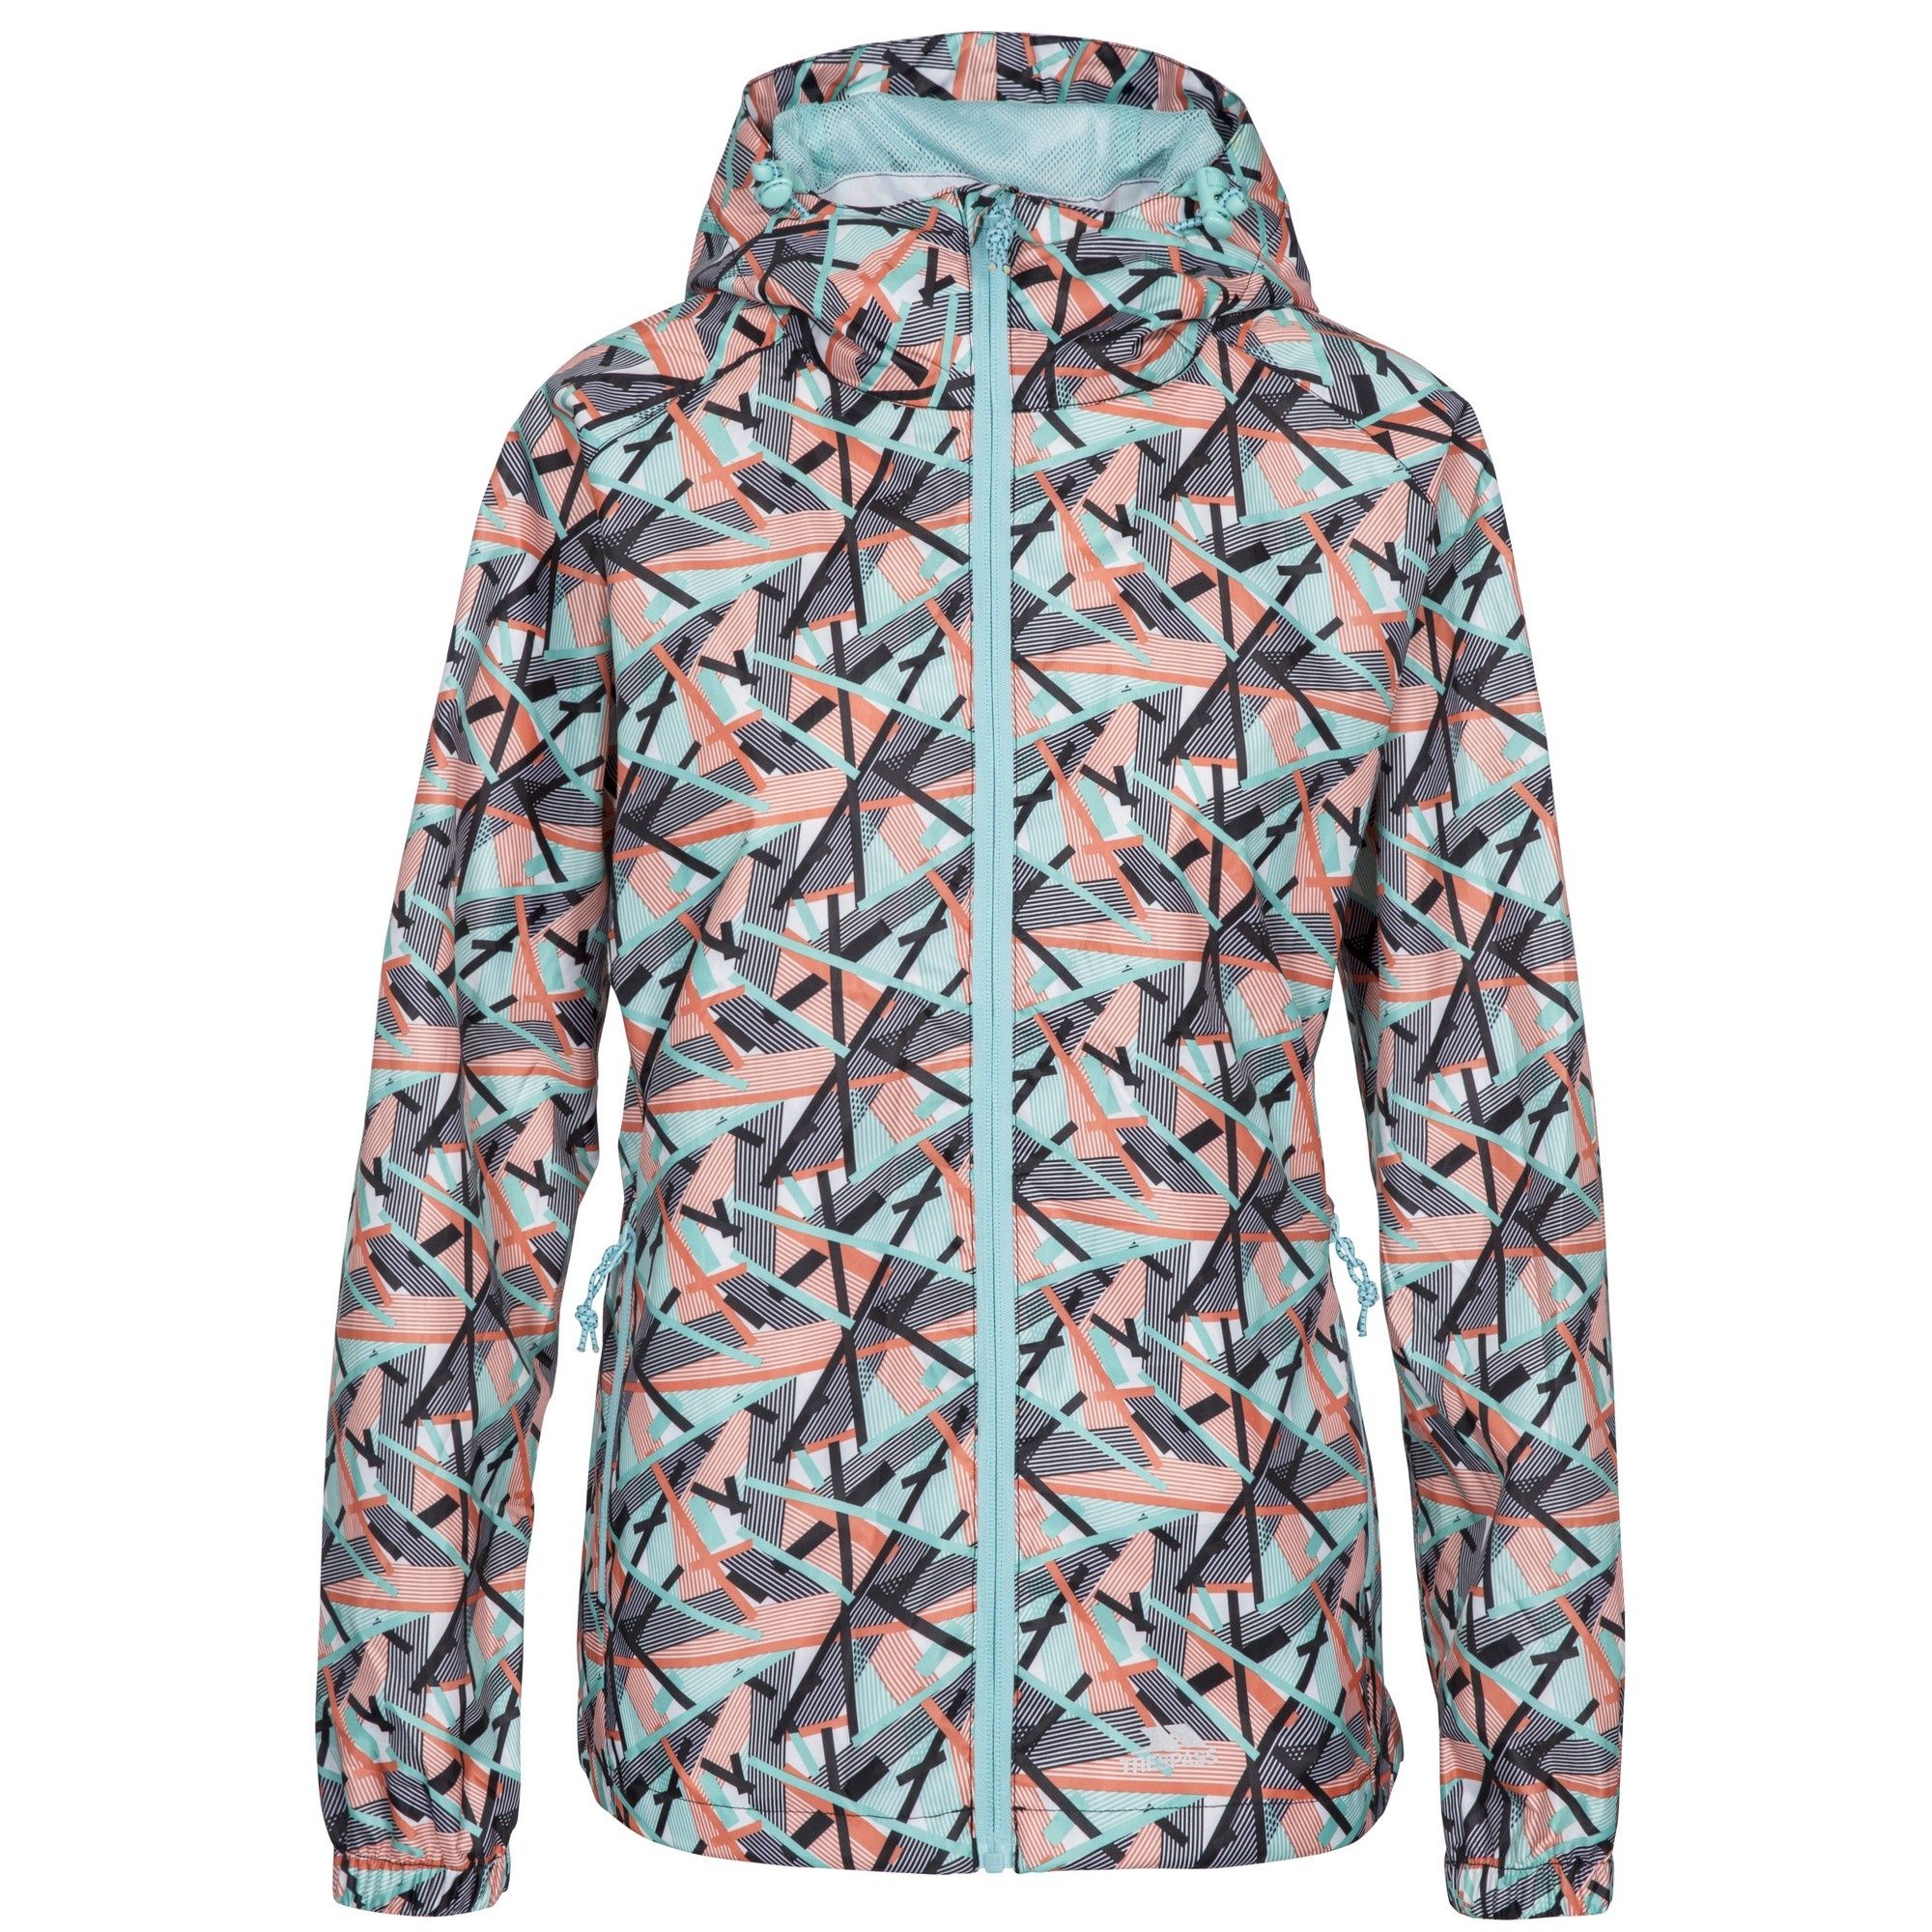 Printed shell. Contrast mesh lining. Adjustable grown on hood. 2 zip pockets. Full elasticated cuff. Contrast zips. Inner storm flap. Adjustable hem drawcord. Ventilated back yoke. Jacket packs away into pouch. Waterproof 5000mm, breathable 5000mvp, windproof, taped seams. Shell: 100% Polyester, PU coating, Lining: 100% Polyester. Trespass Womens Chest Sizing (approx): XS/8 - 32in/81cm, S/10 - 34in/86cm, M/12 - 36in/91.4cm, L/14 - 38in/96.5cm, XL/16 - 40in/101.5cm, XXL/18 - 42in/106.5cm.